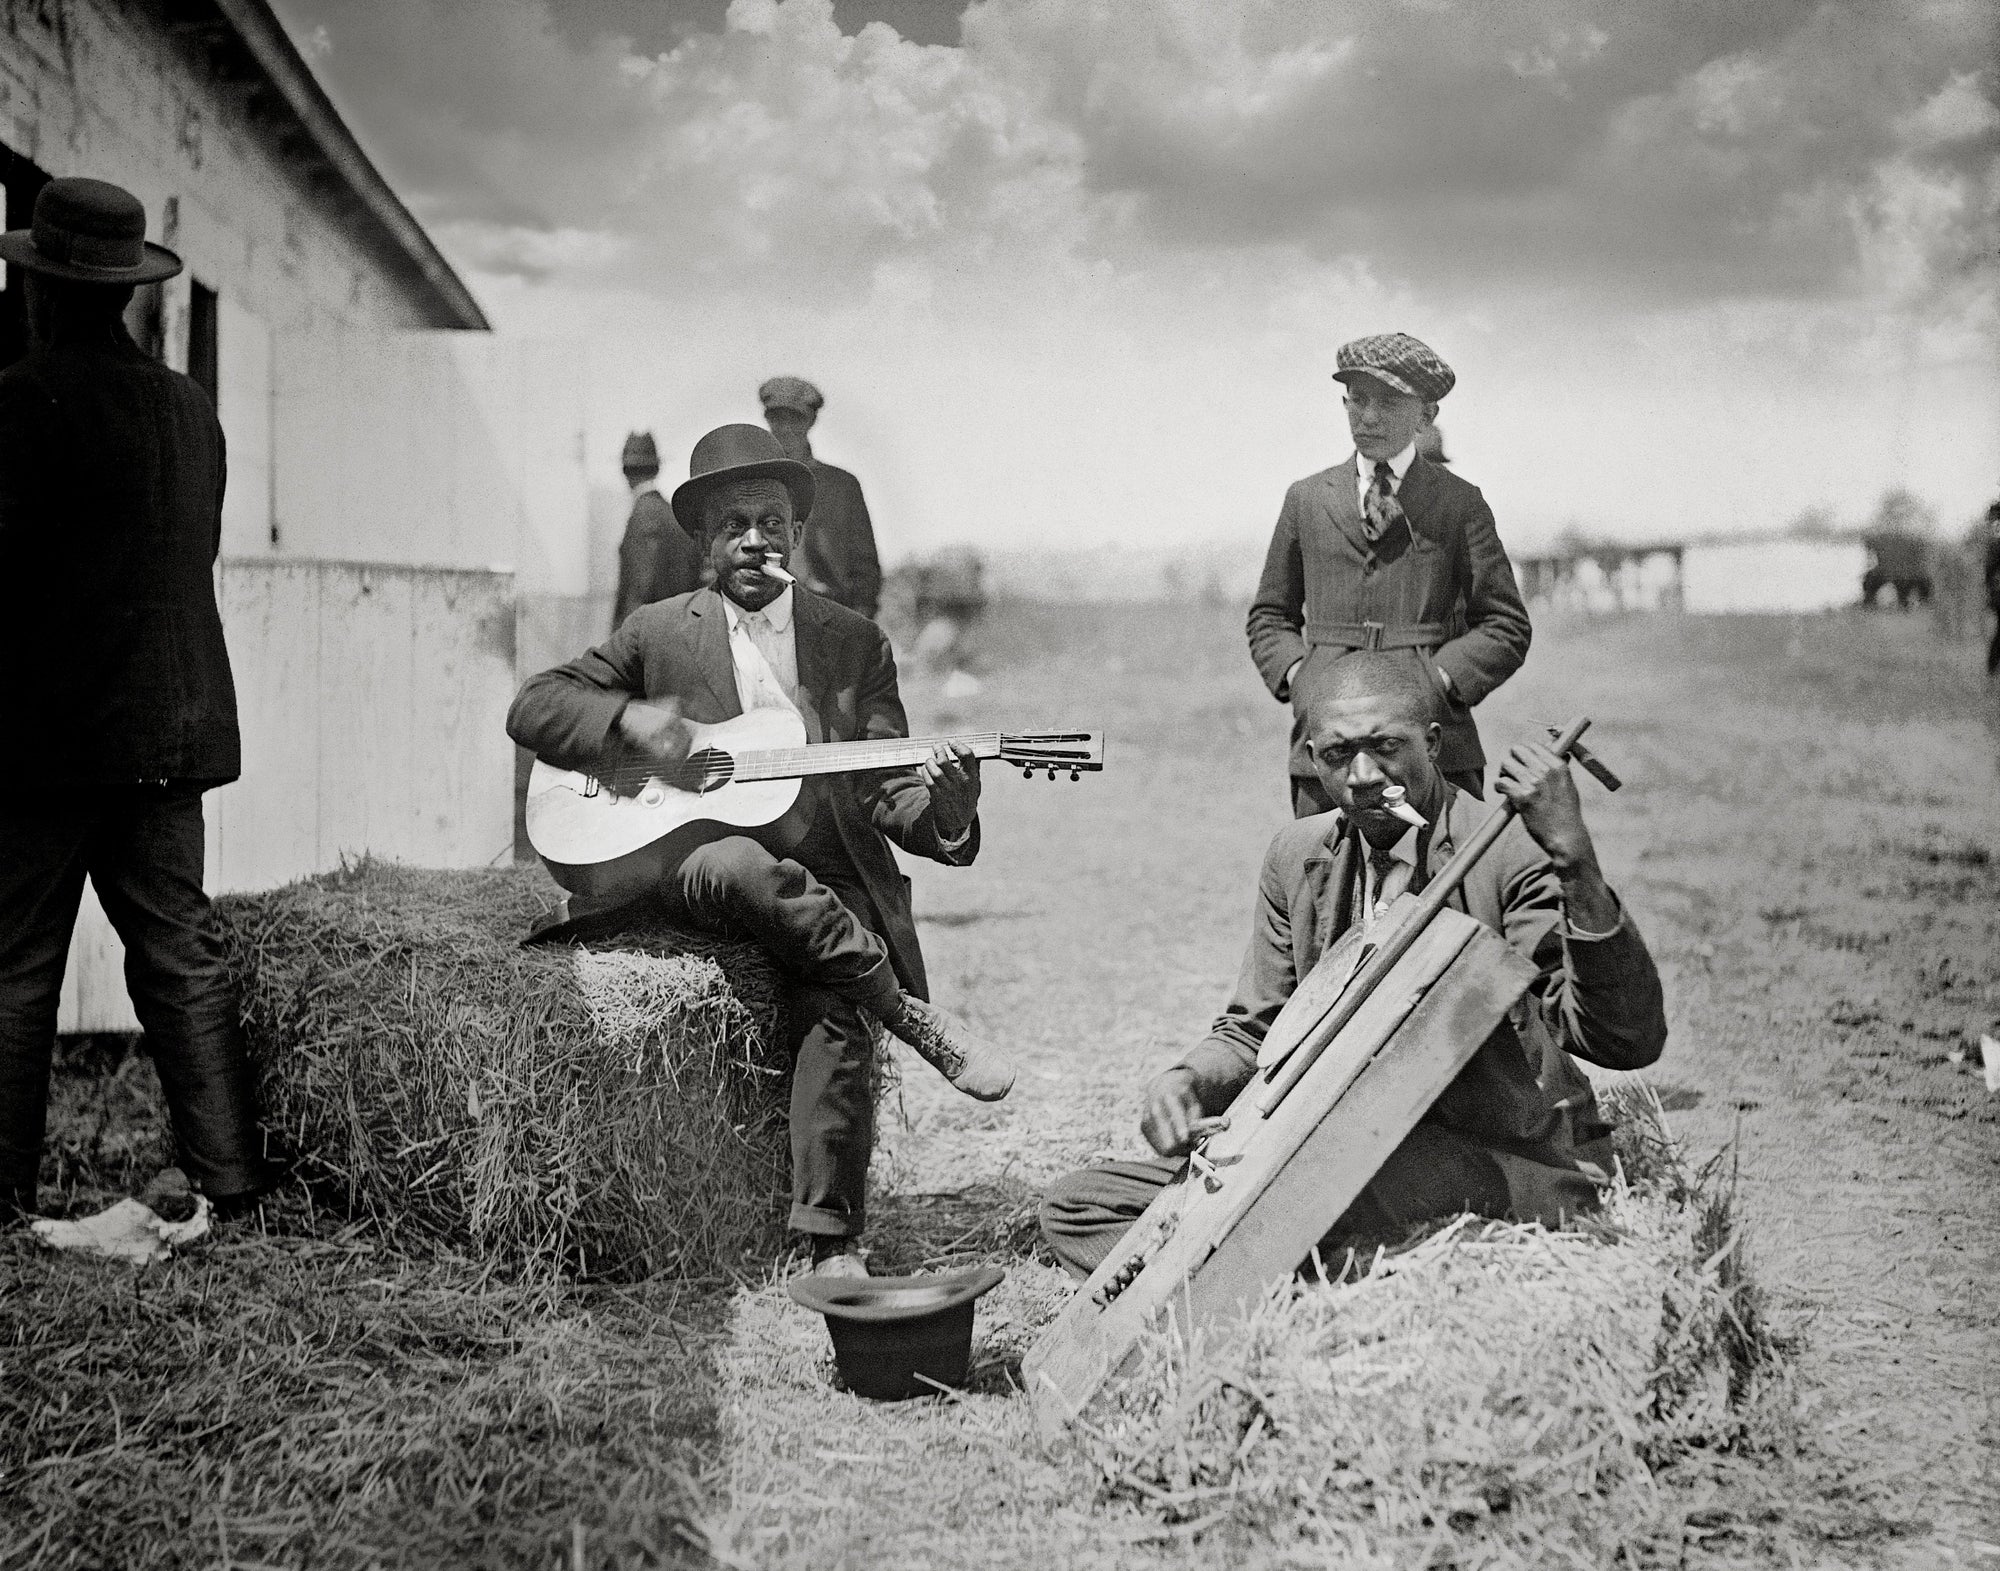 African American Musicians With Kazoos and Guitars Historical Pix